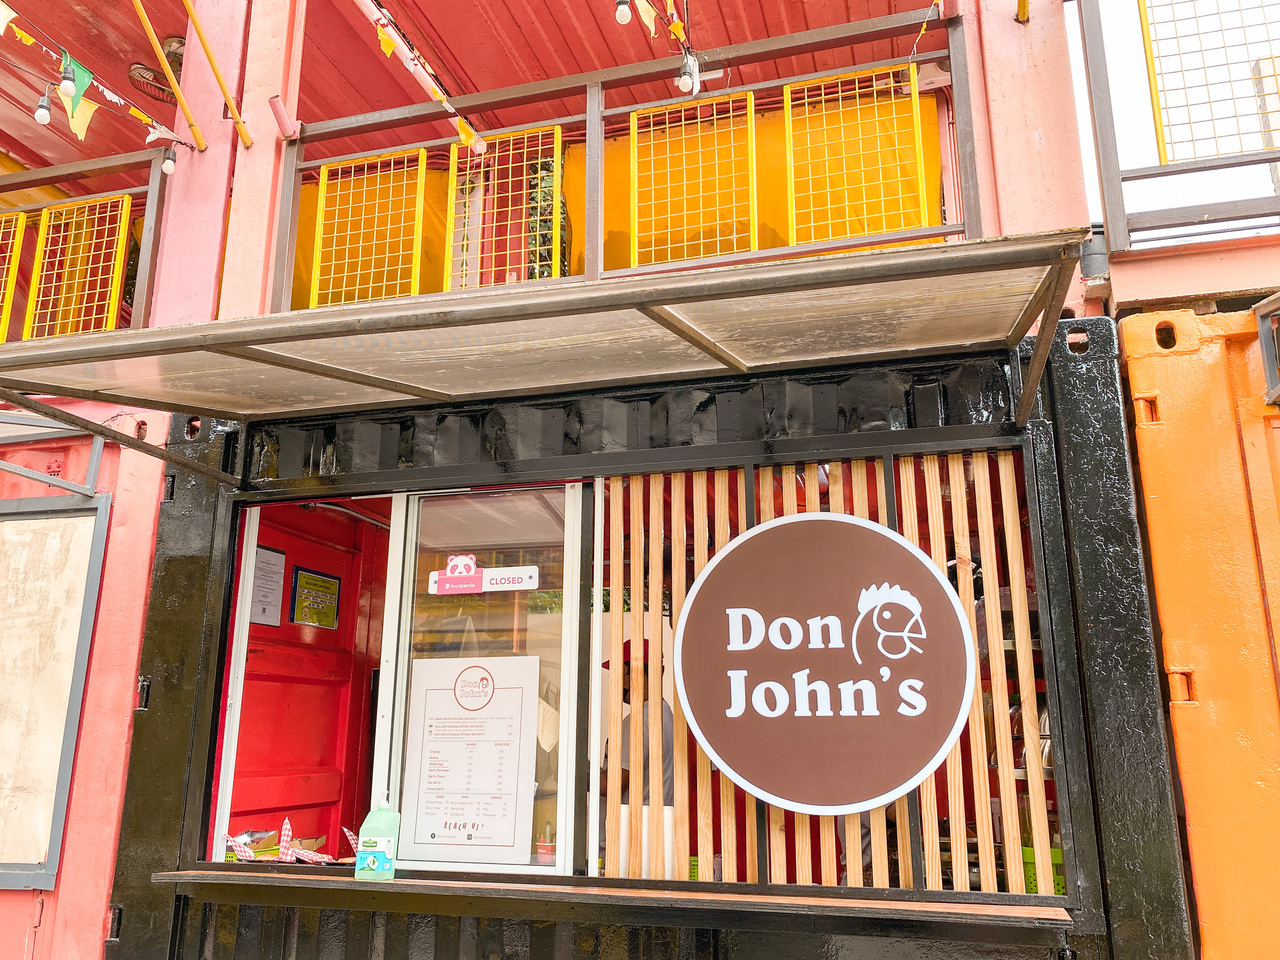 Don John's: The Don of Chicken Sandwiches & Wings